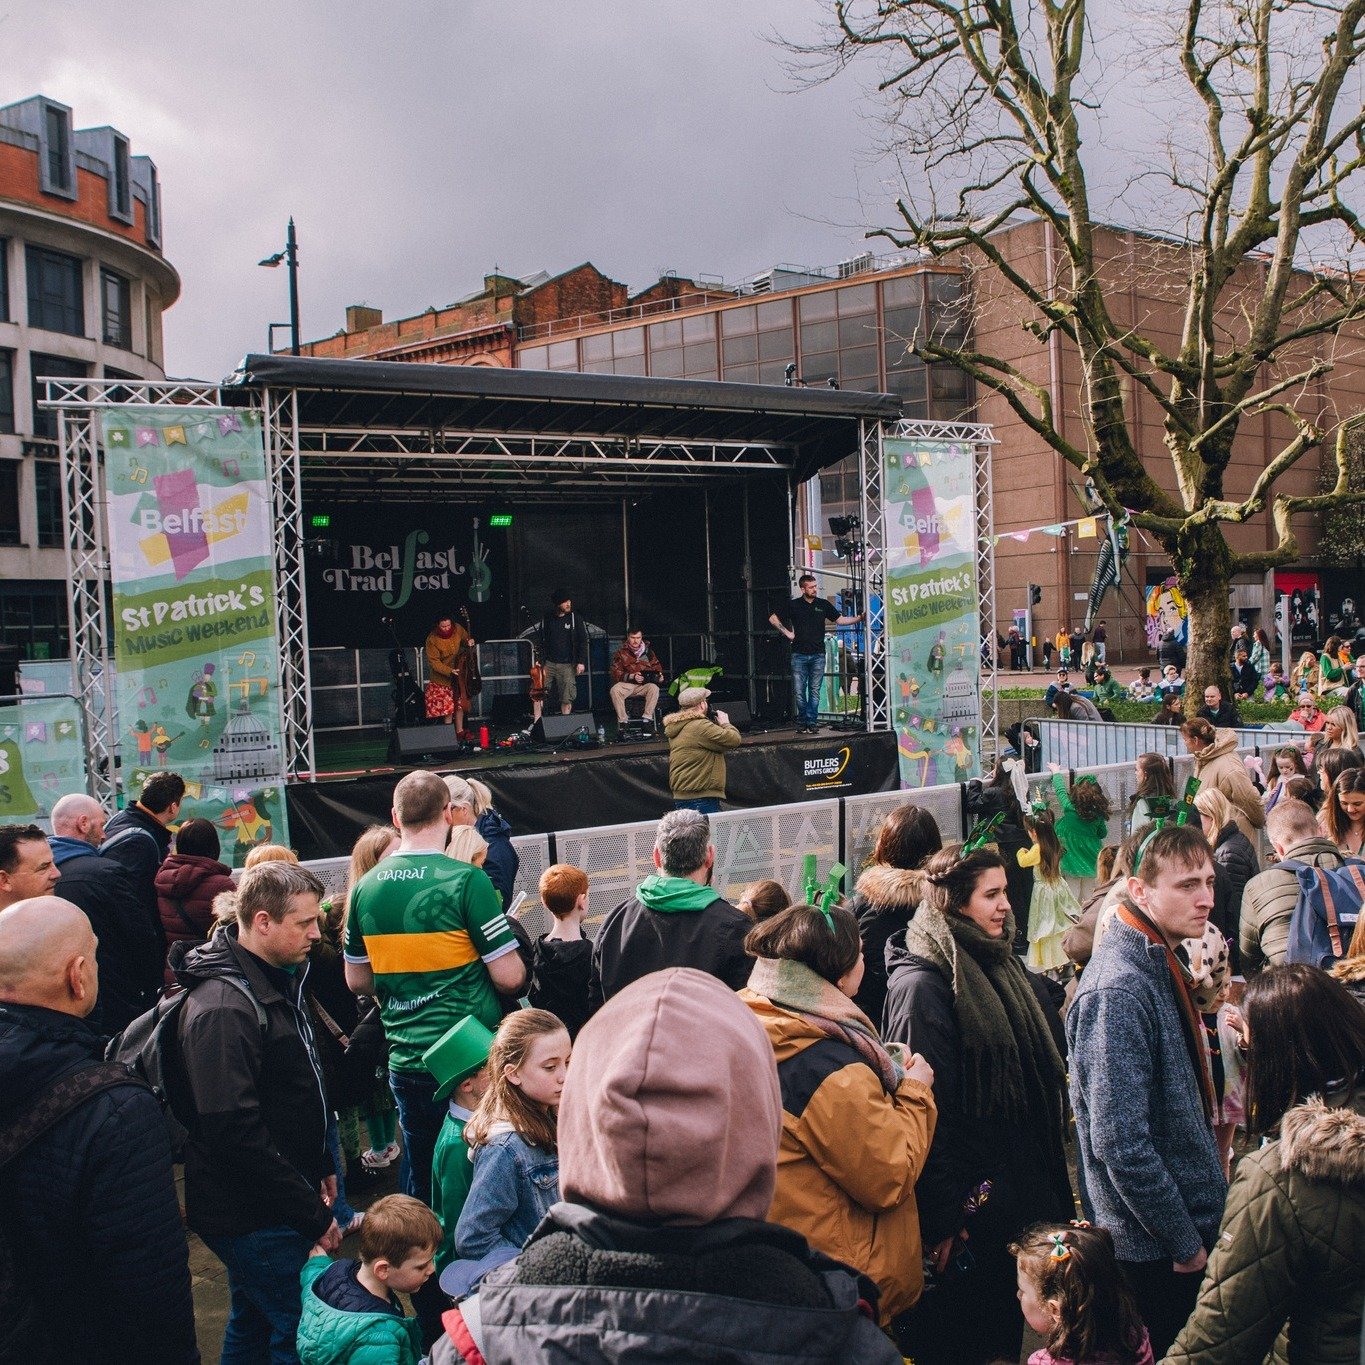 A few shots from St Patrick's Music Weekend Festival Village at Cathedral Quarter; a fantastic afternoon of music, dance, food and interactive family fun 🍀🎶💃🏼🎻

@belfastcitycouncil @ourbelfastmusic @cqbelfast 

#belfaststpats